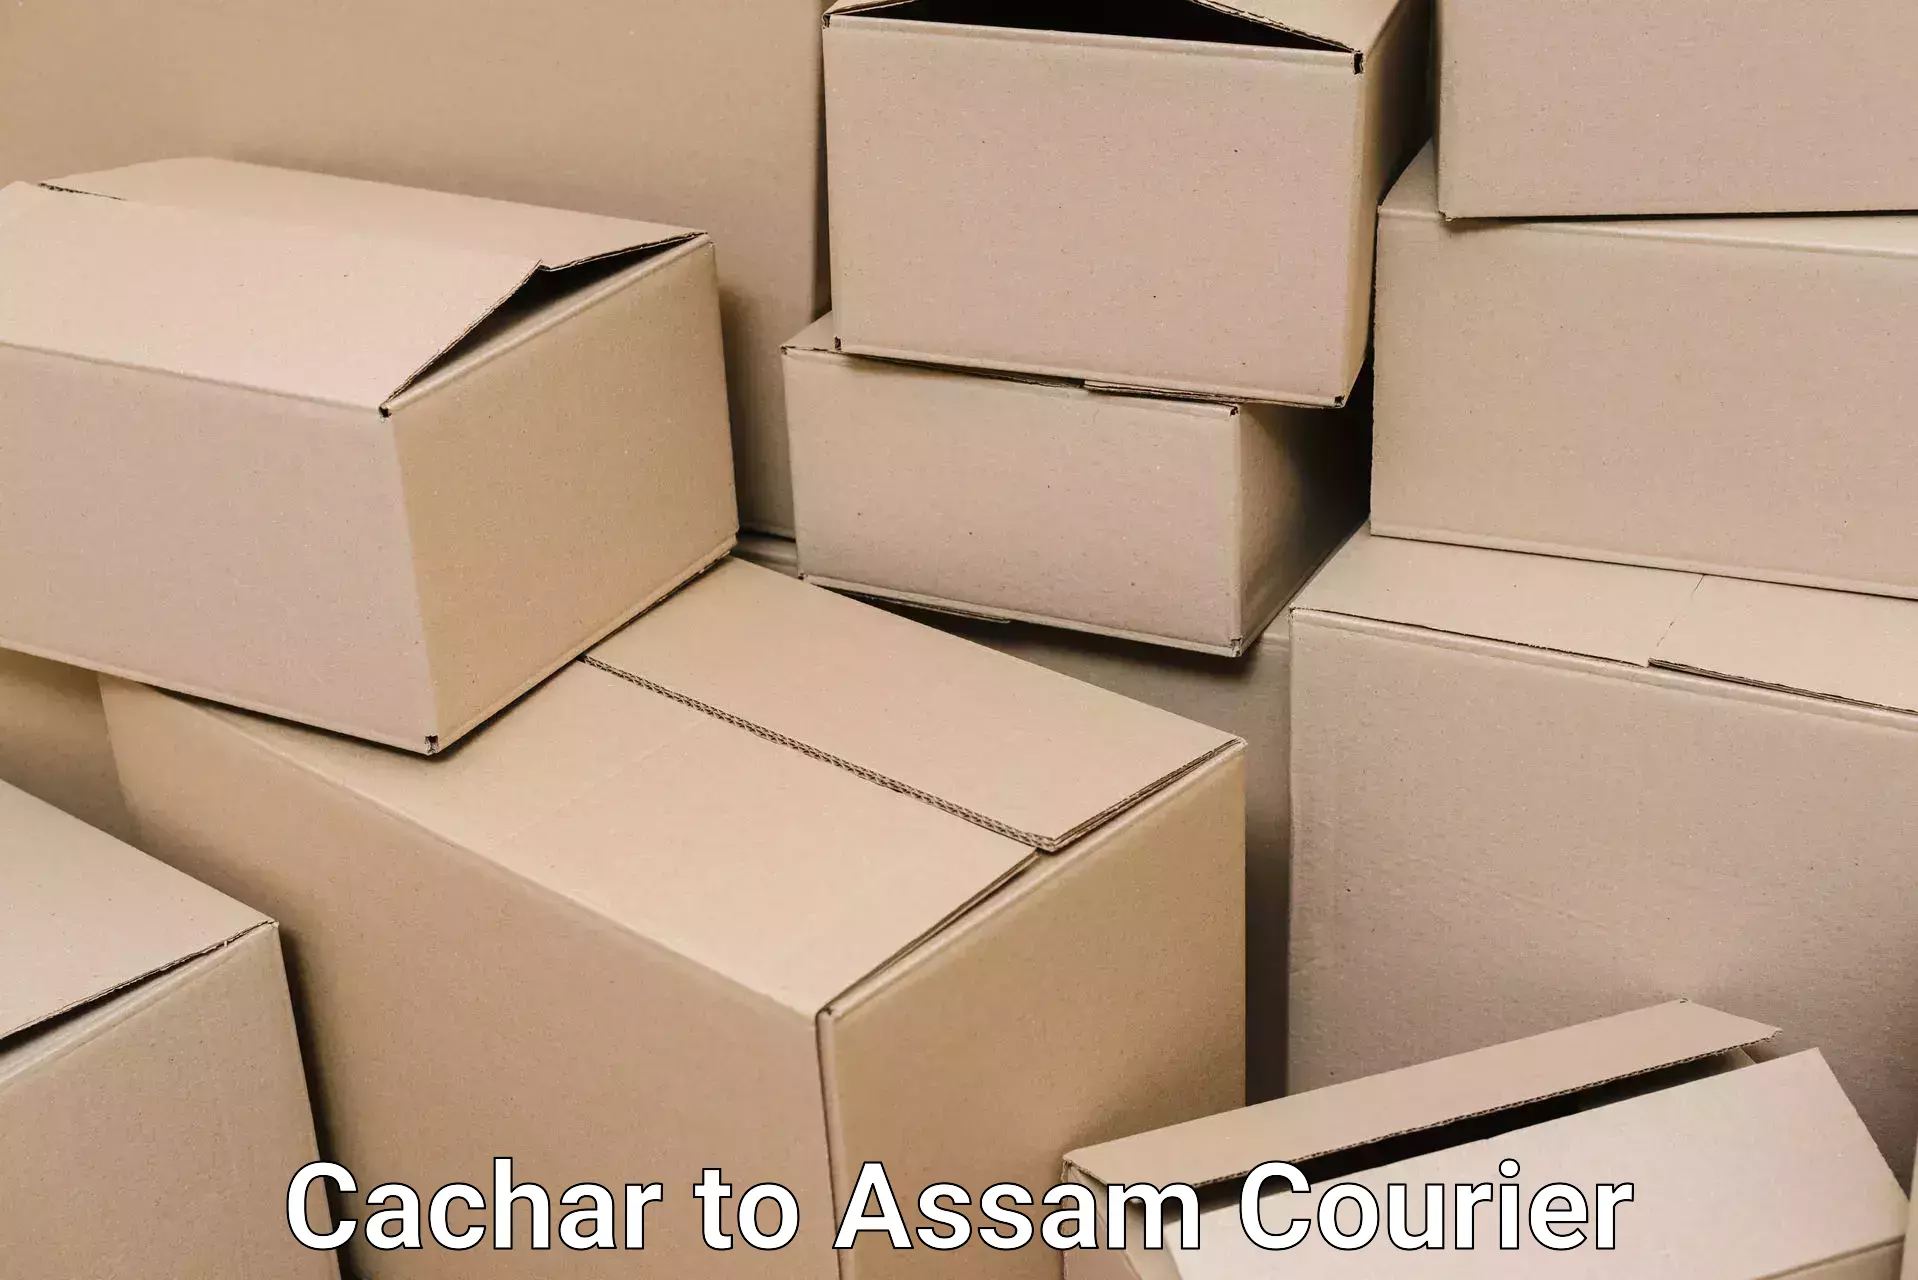 Quality moving and storage Cachar to Bilasipara